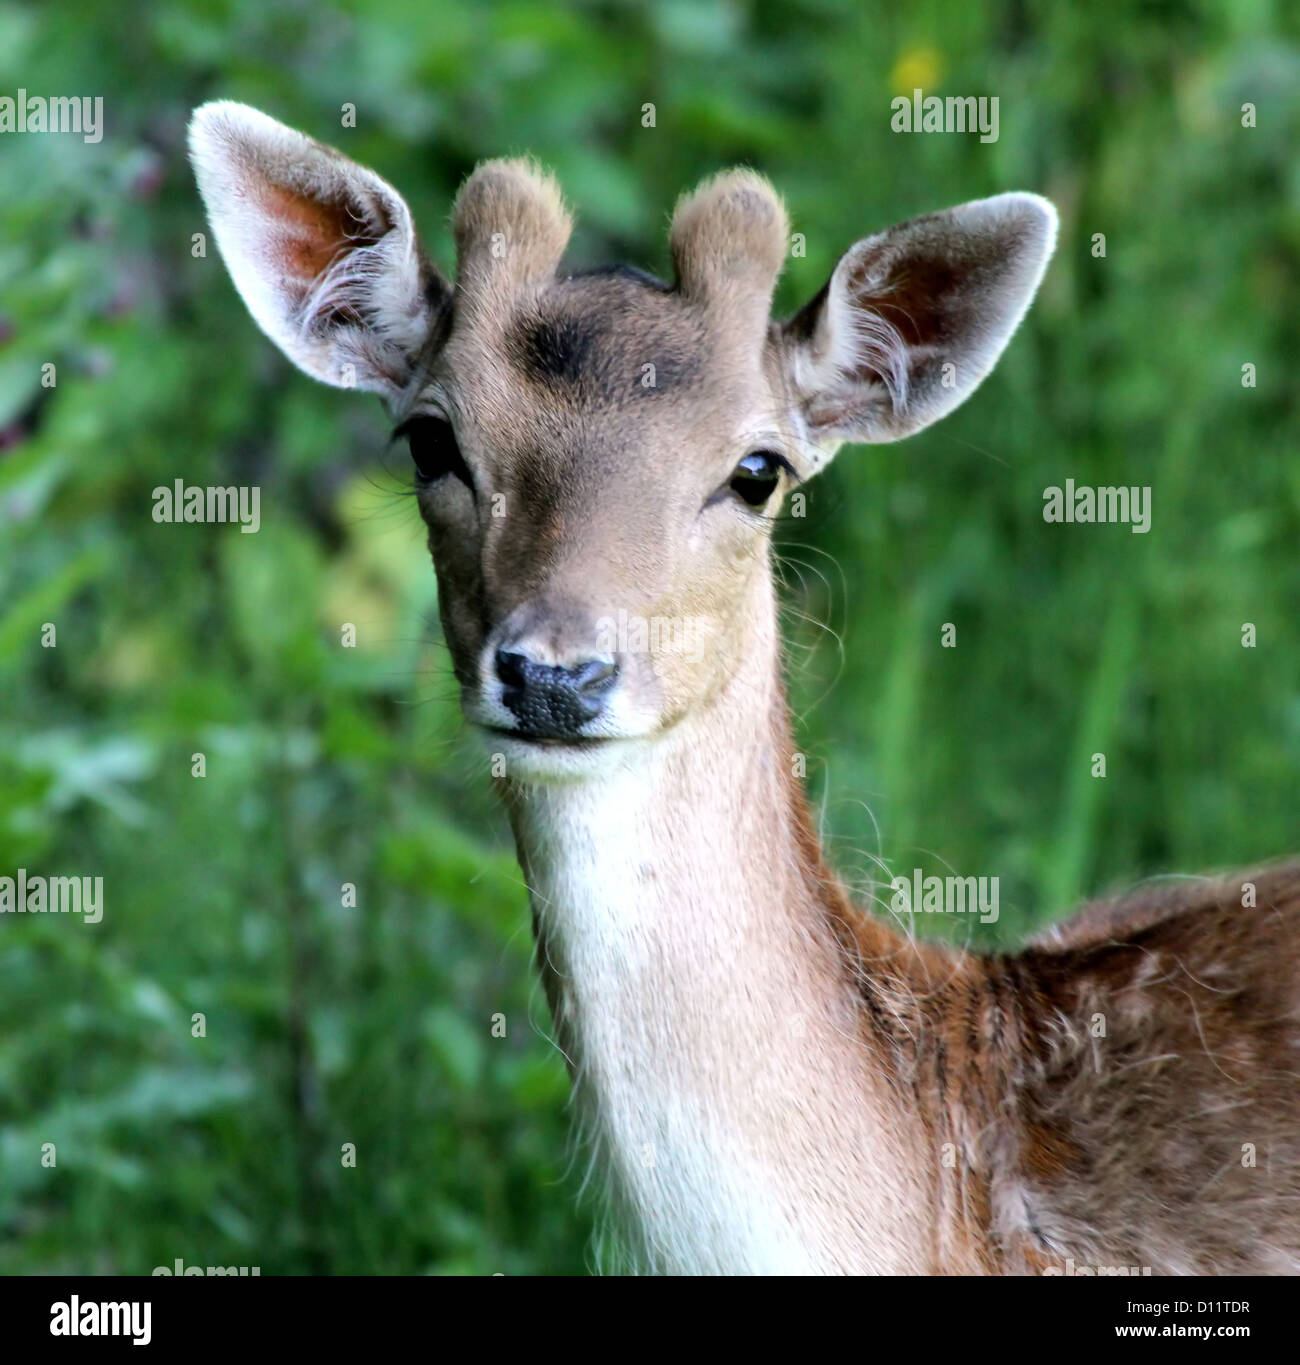 Intimate portrait of a young male fallow deer with antlers just appearing Stock Photo